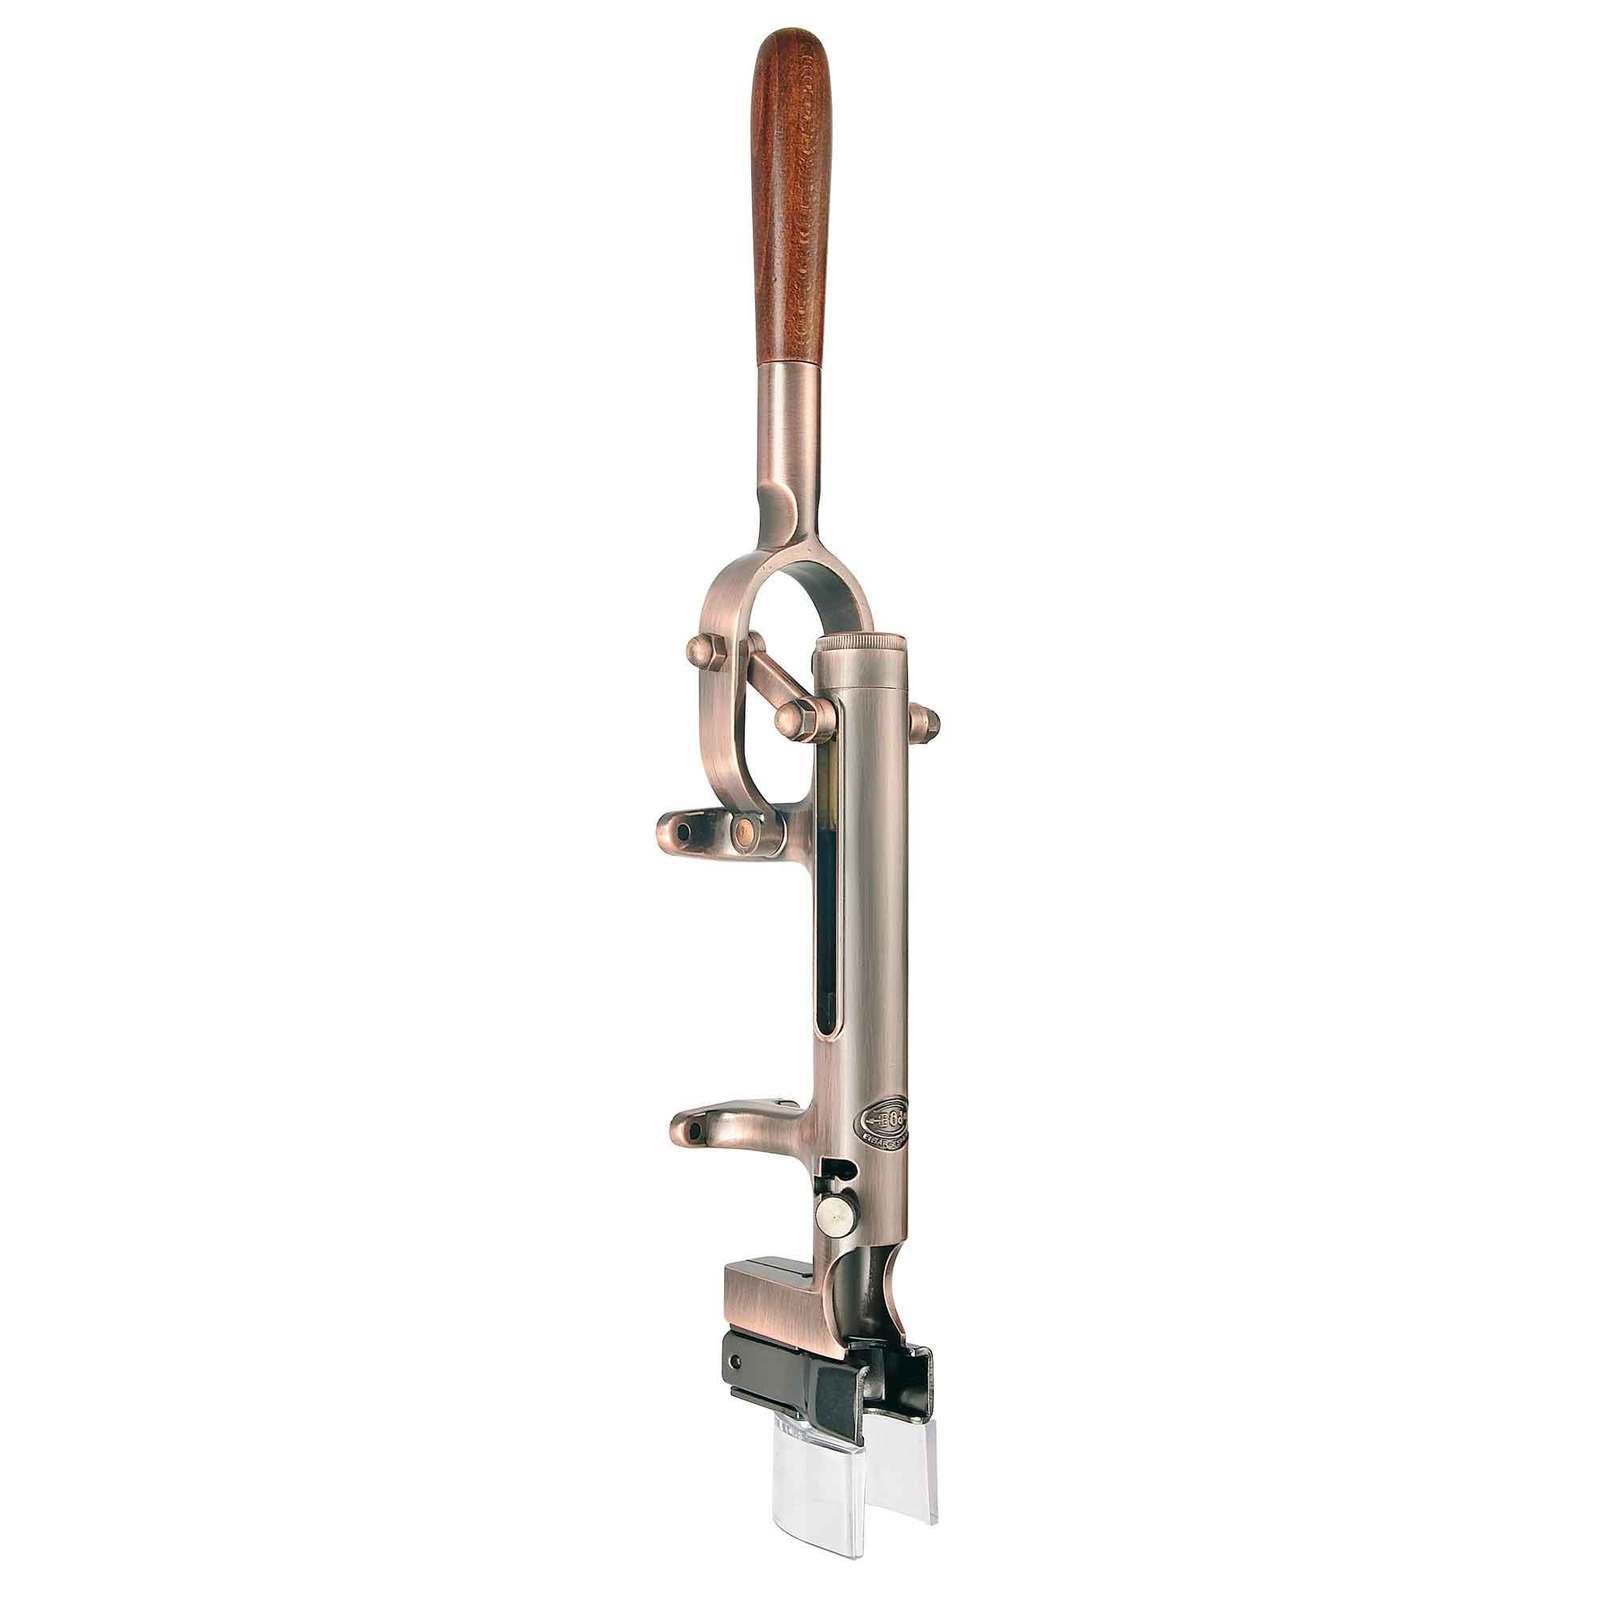 BOJ 00992504 - Traditional Wall-Mounted Wine Opener - Old Coppered - $215.99